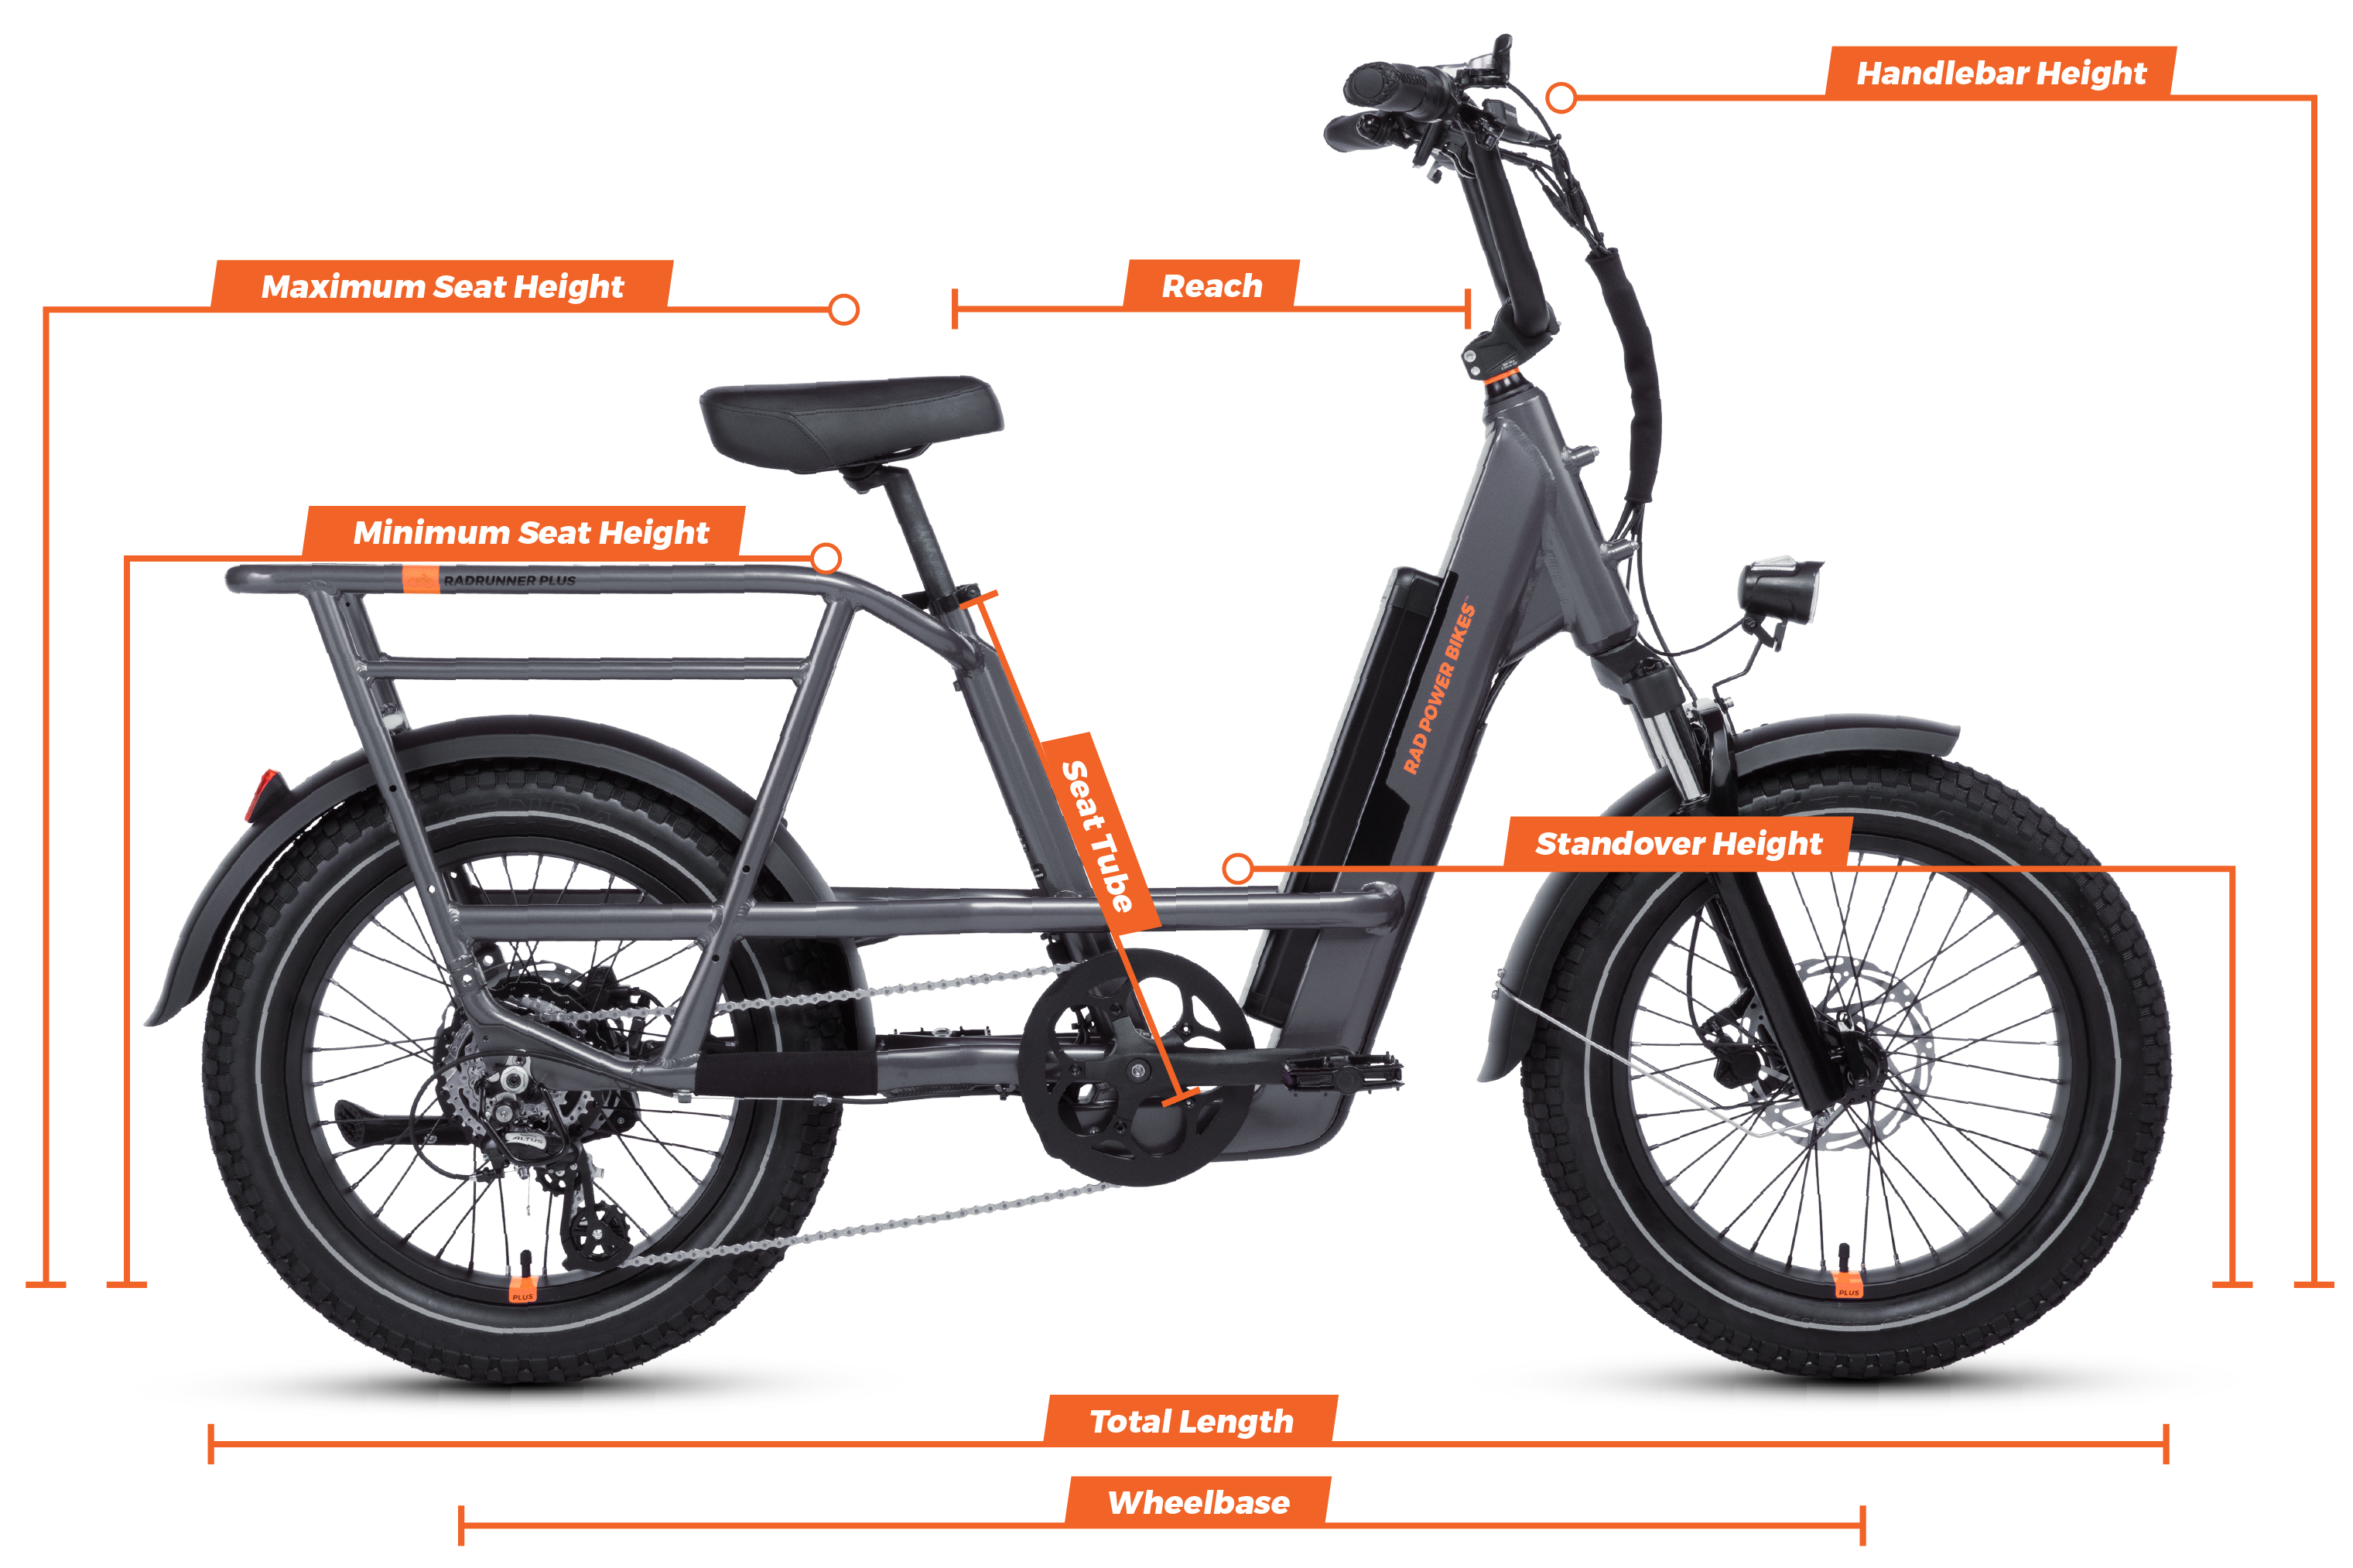 Geometry chart for the RadRunner™ 3 Plus Electric Utility Bike